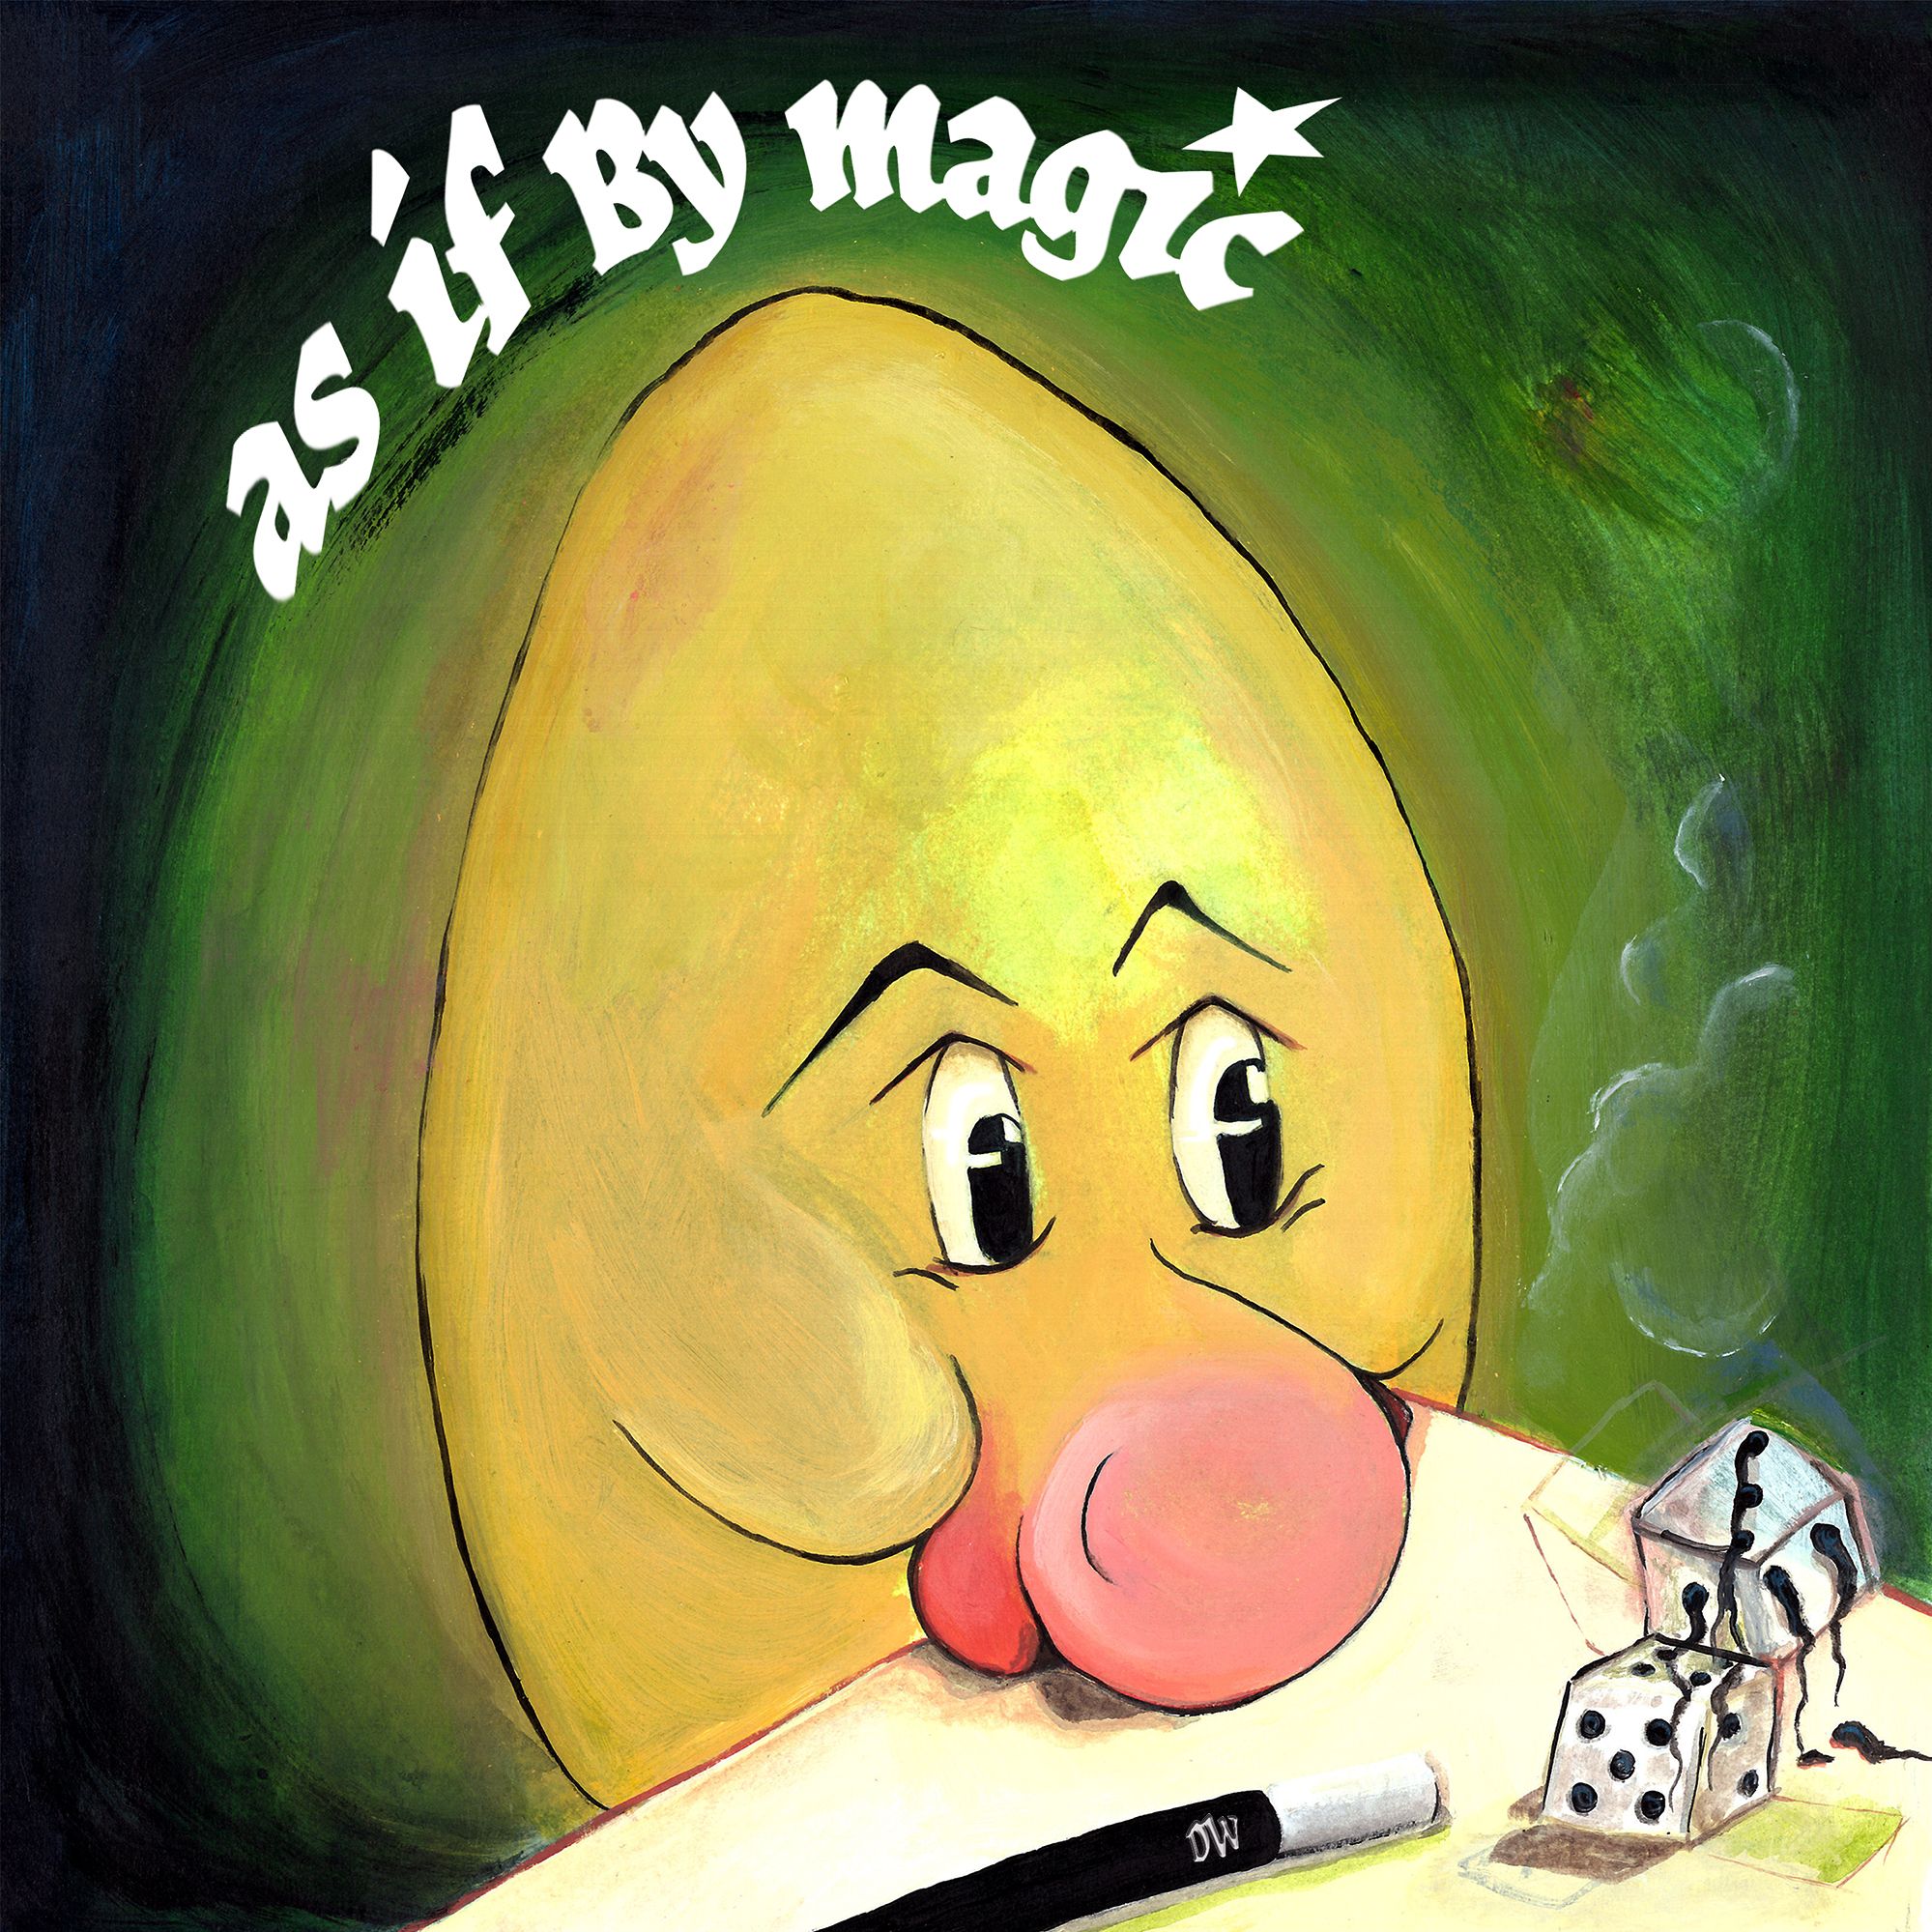 Artwork for As If By Magic by Don't Worry